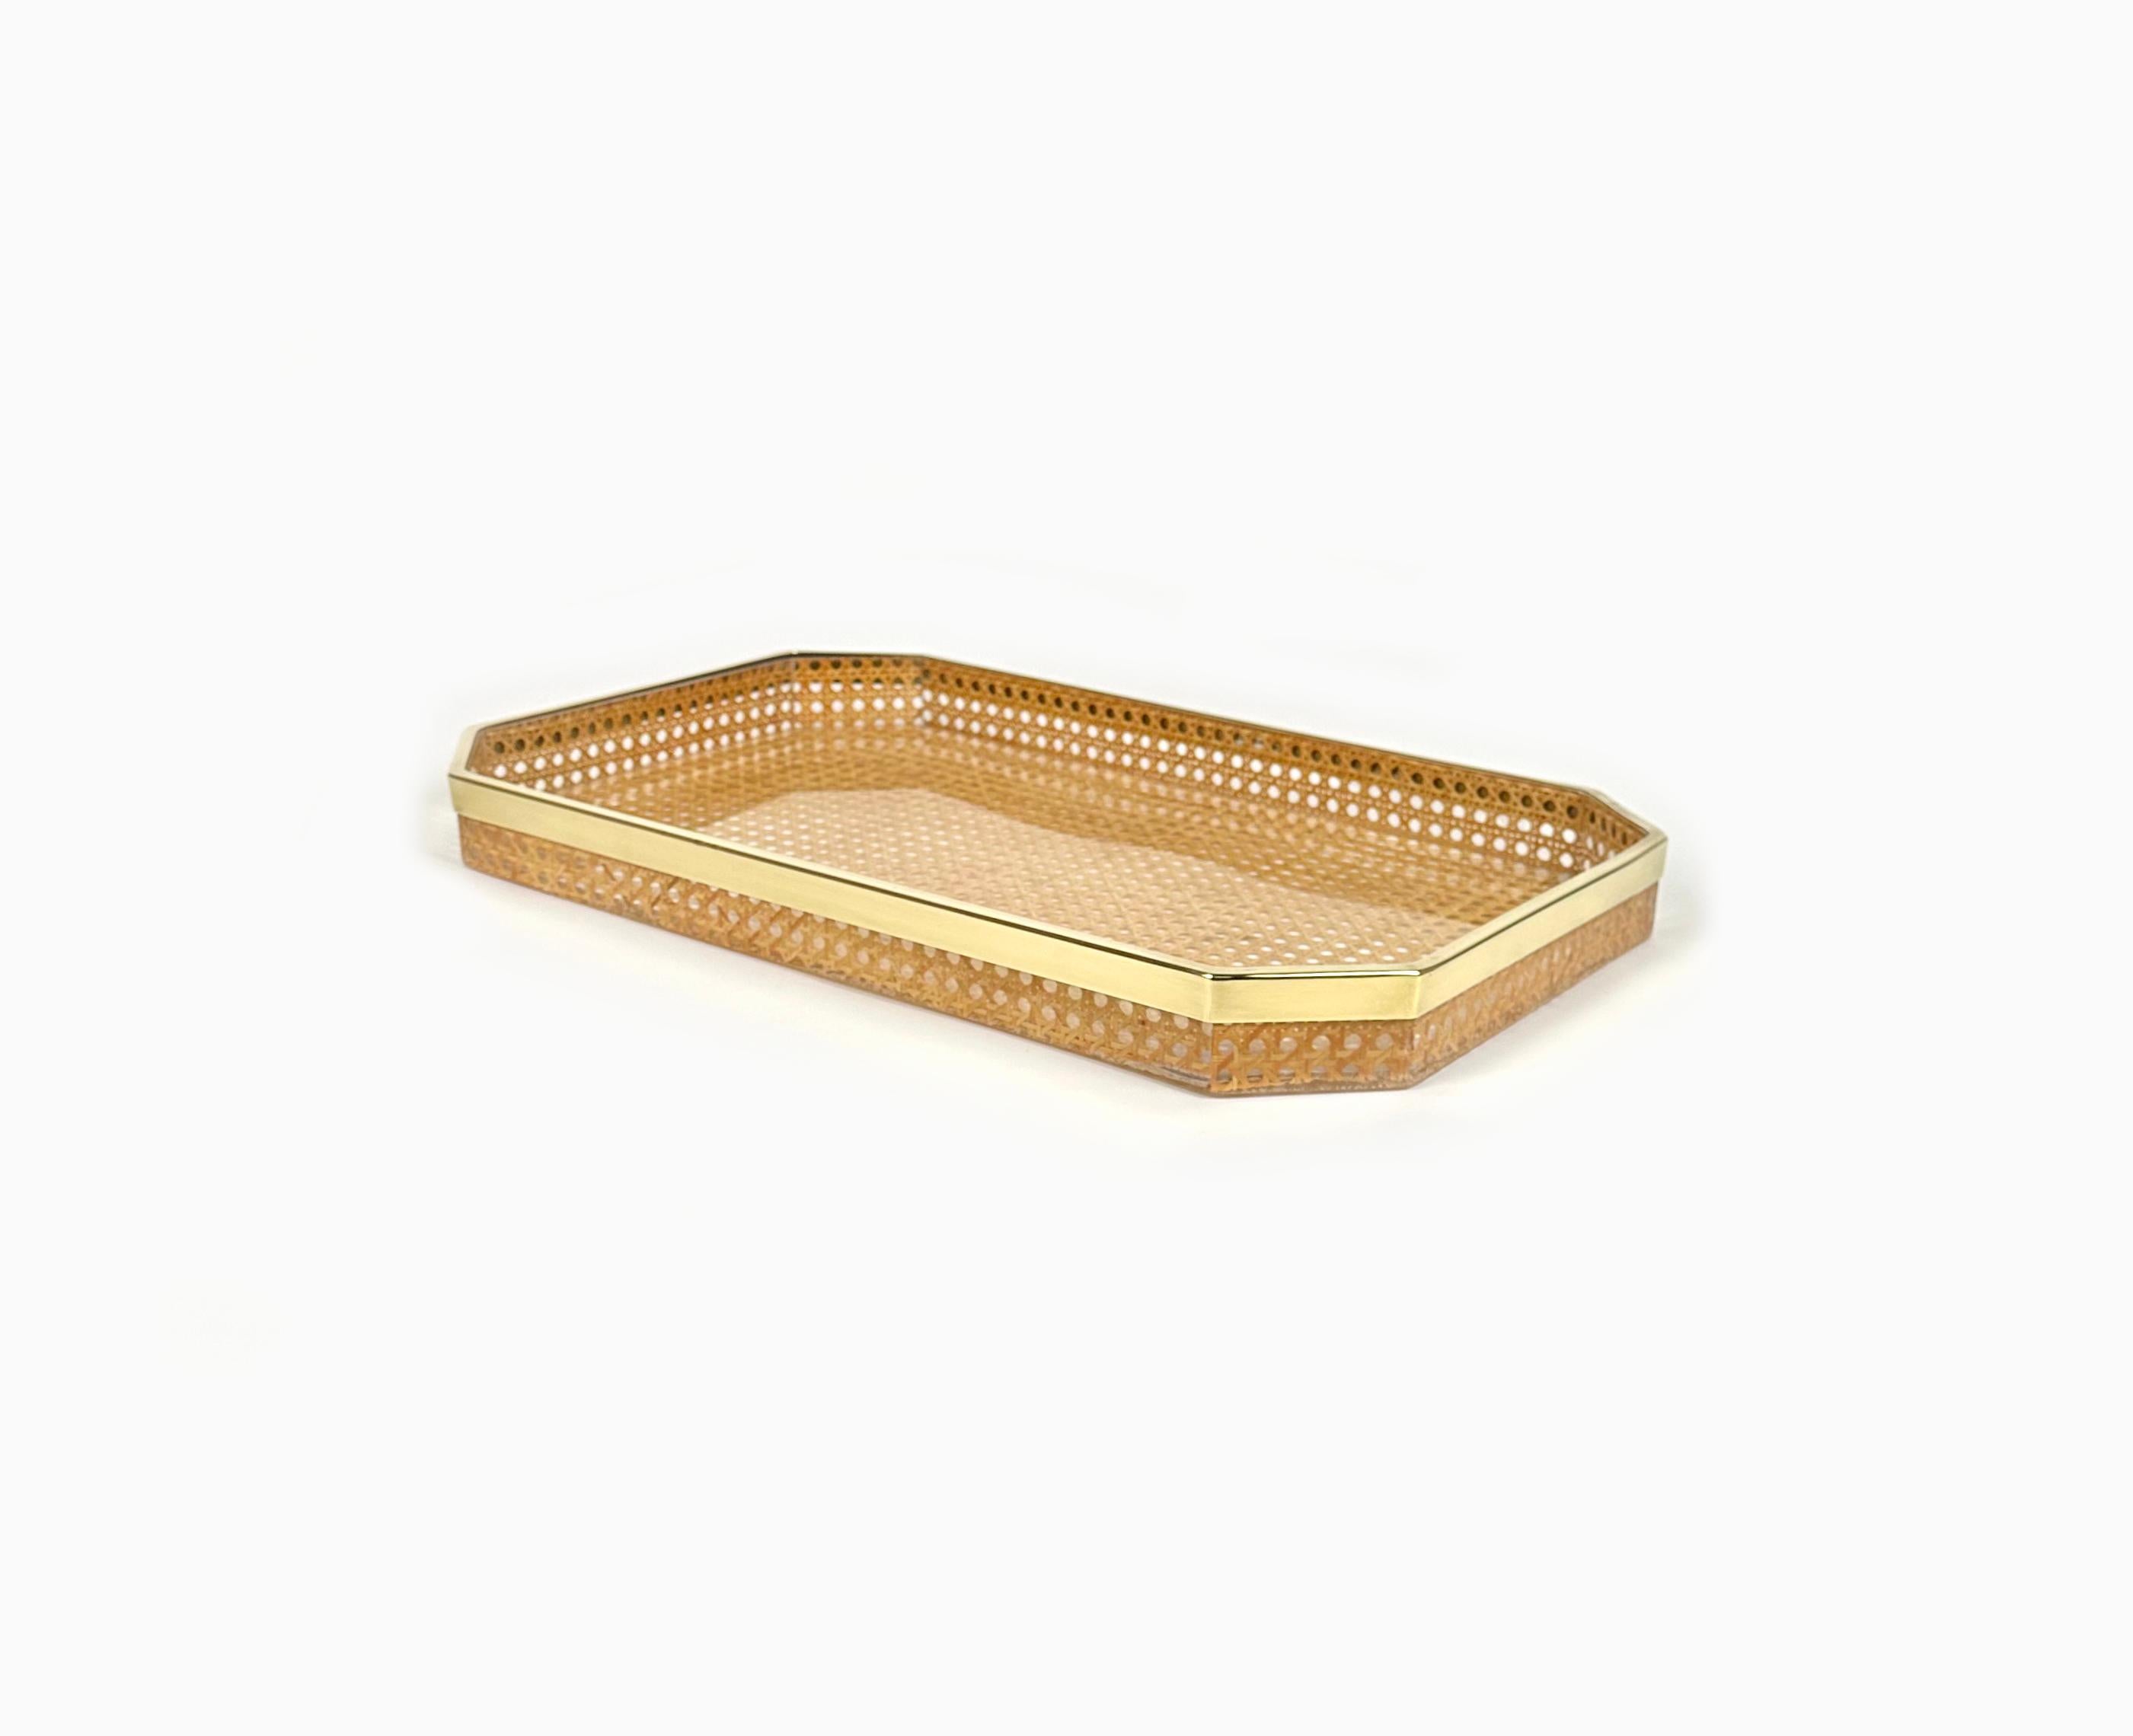 Late 20th Century Serving Tray in Lucite, Rattan and Brass Christian Dior Style, Italy, 1970s